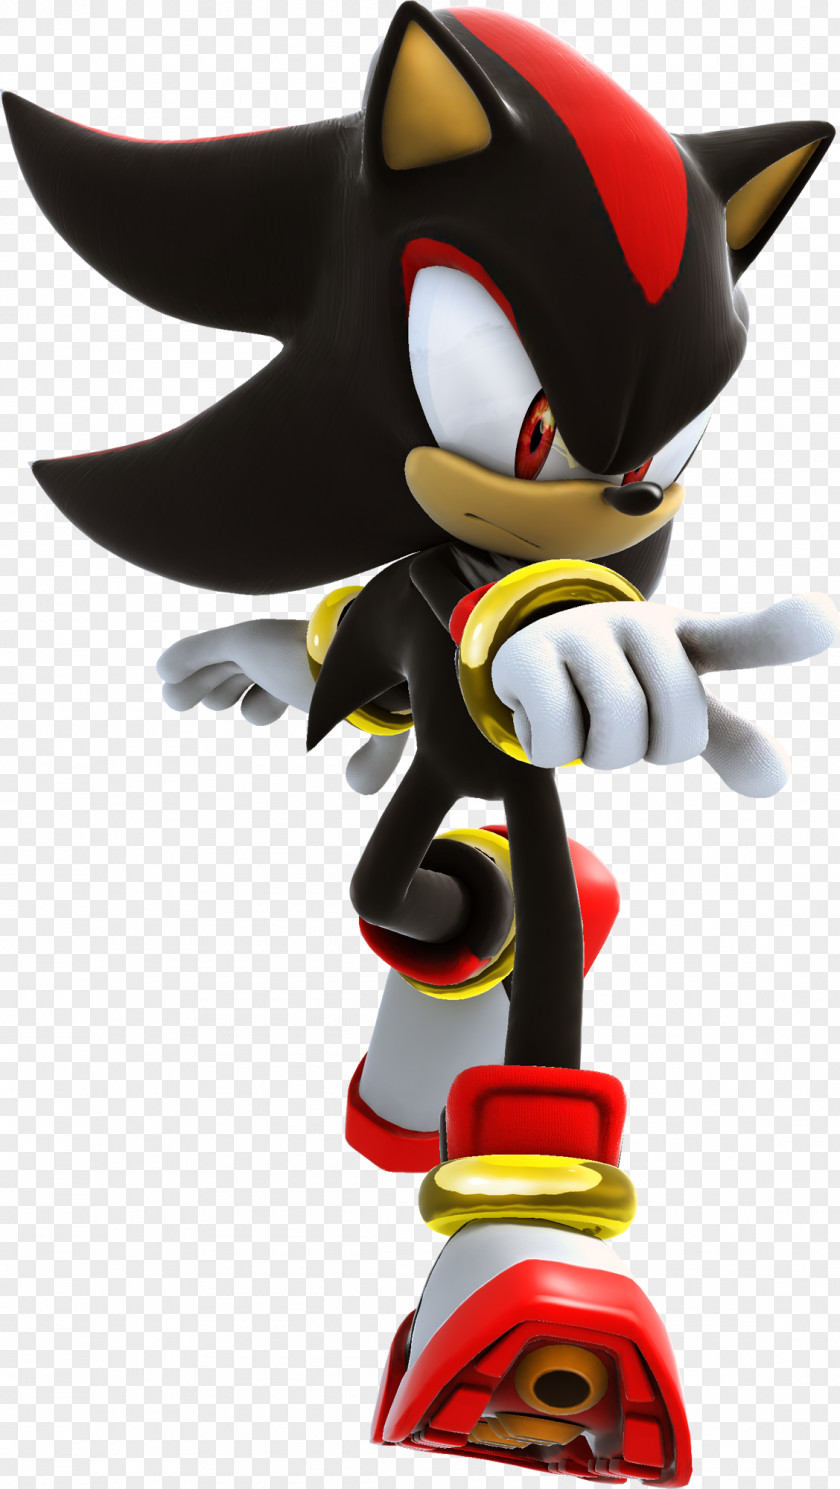 Hedgehog Shadow The Sonic & Knuckles Mario At Olympic Games Adventure 2 PNG